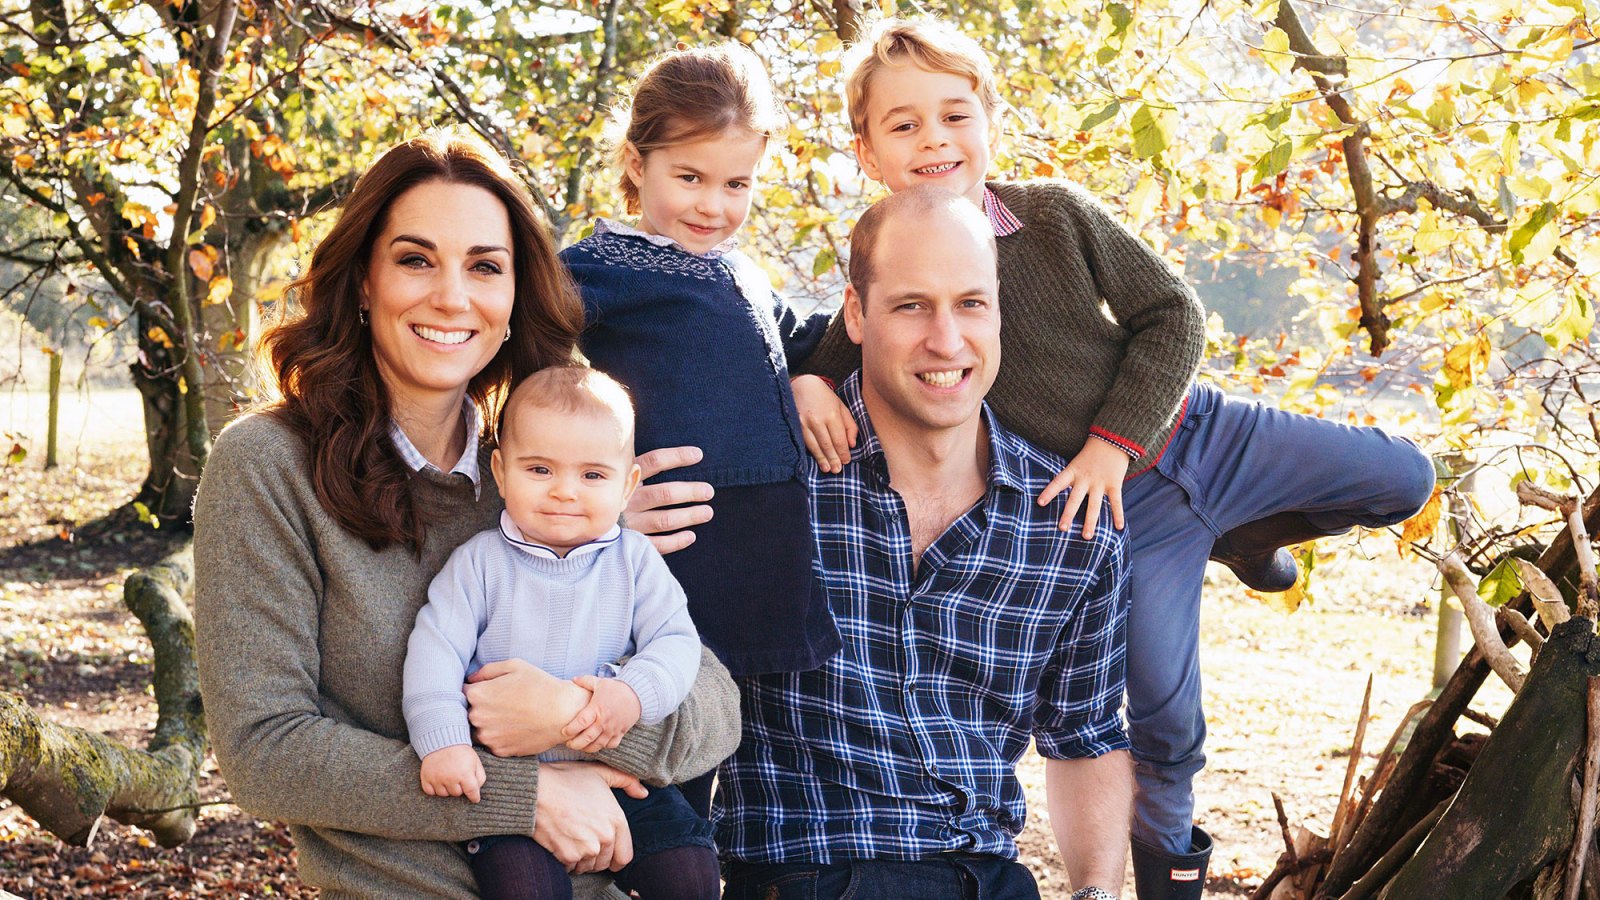 Duchess Kate Prince William Prince Louis Princess Charlotte and Prince George Duchess Kate Entertains the Royal Kids With Baking and Gardening Amid Quarantine